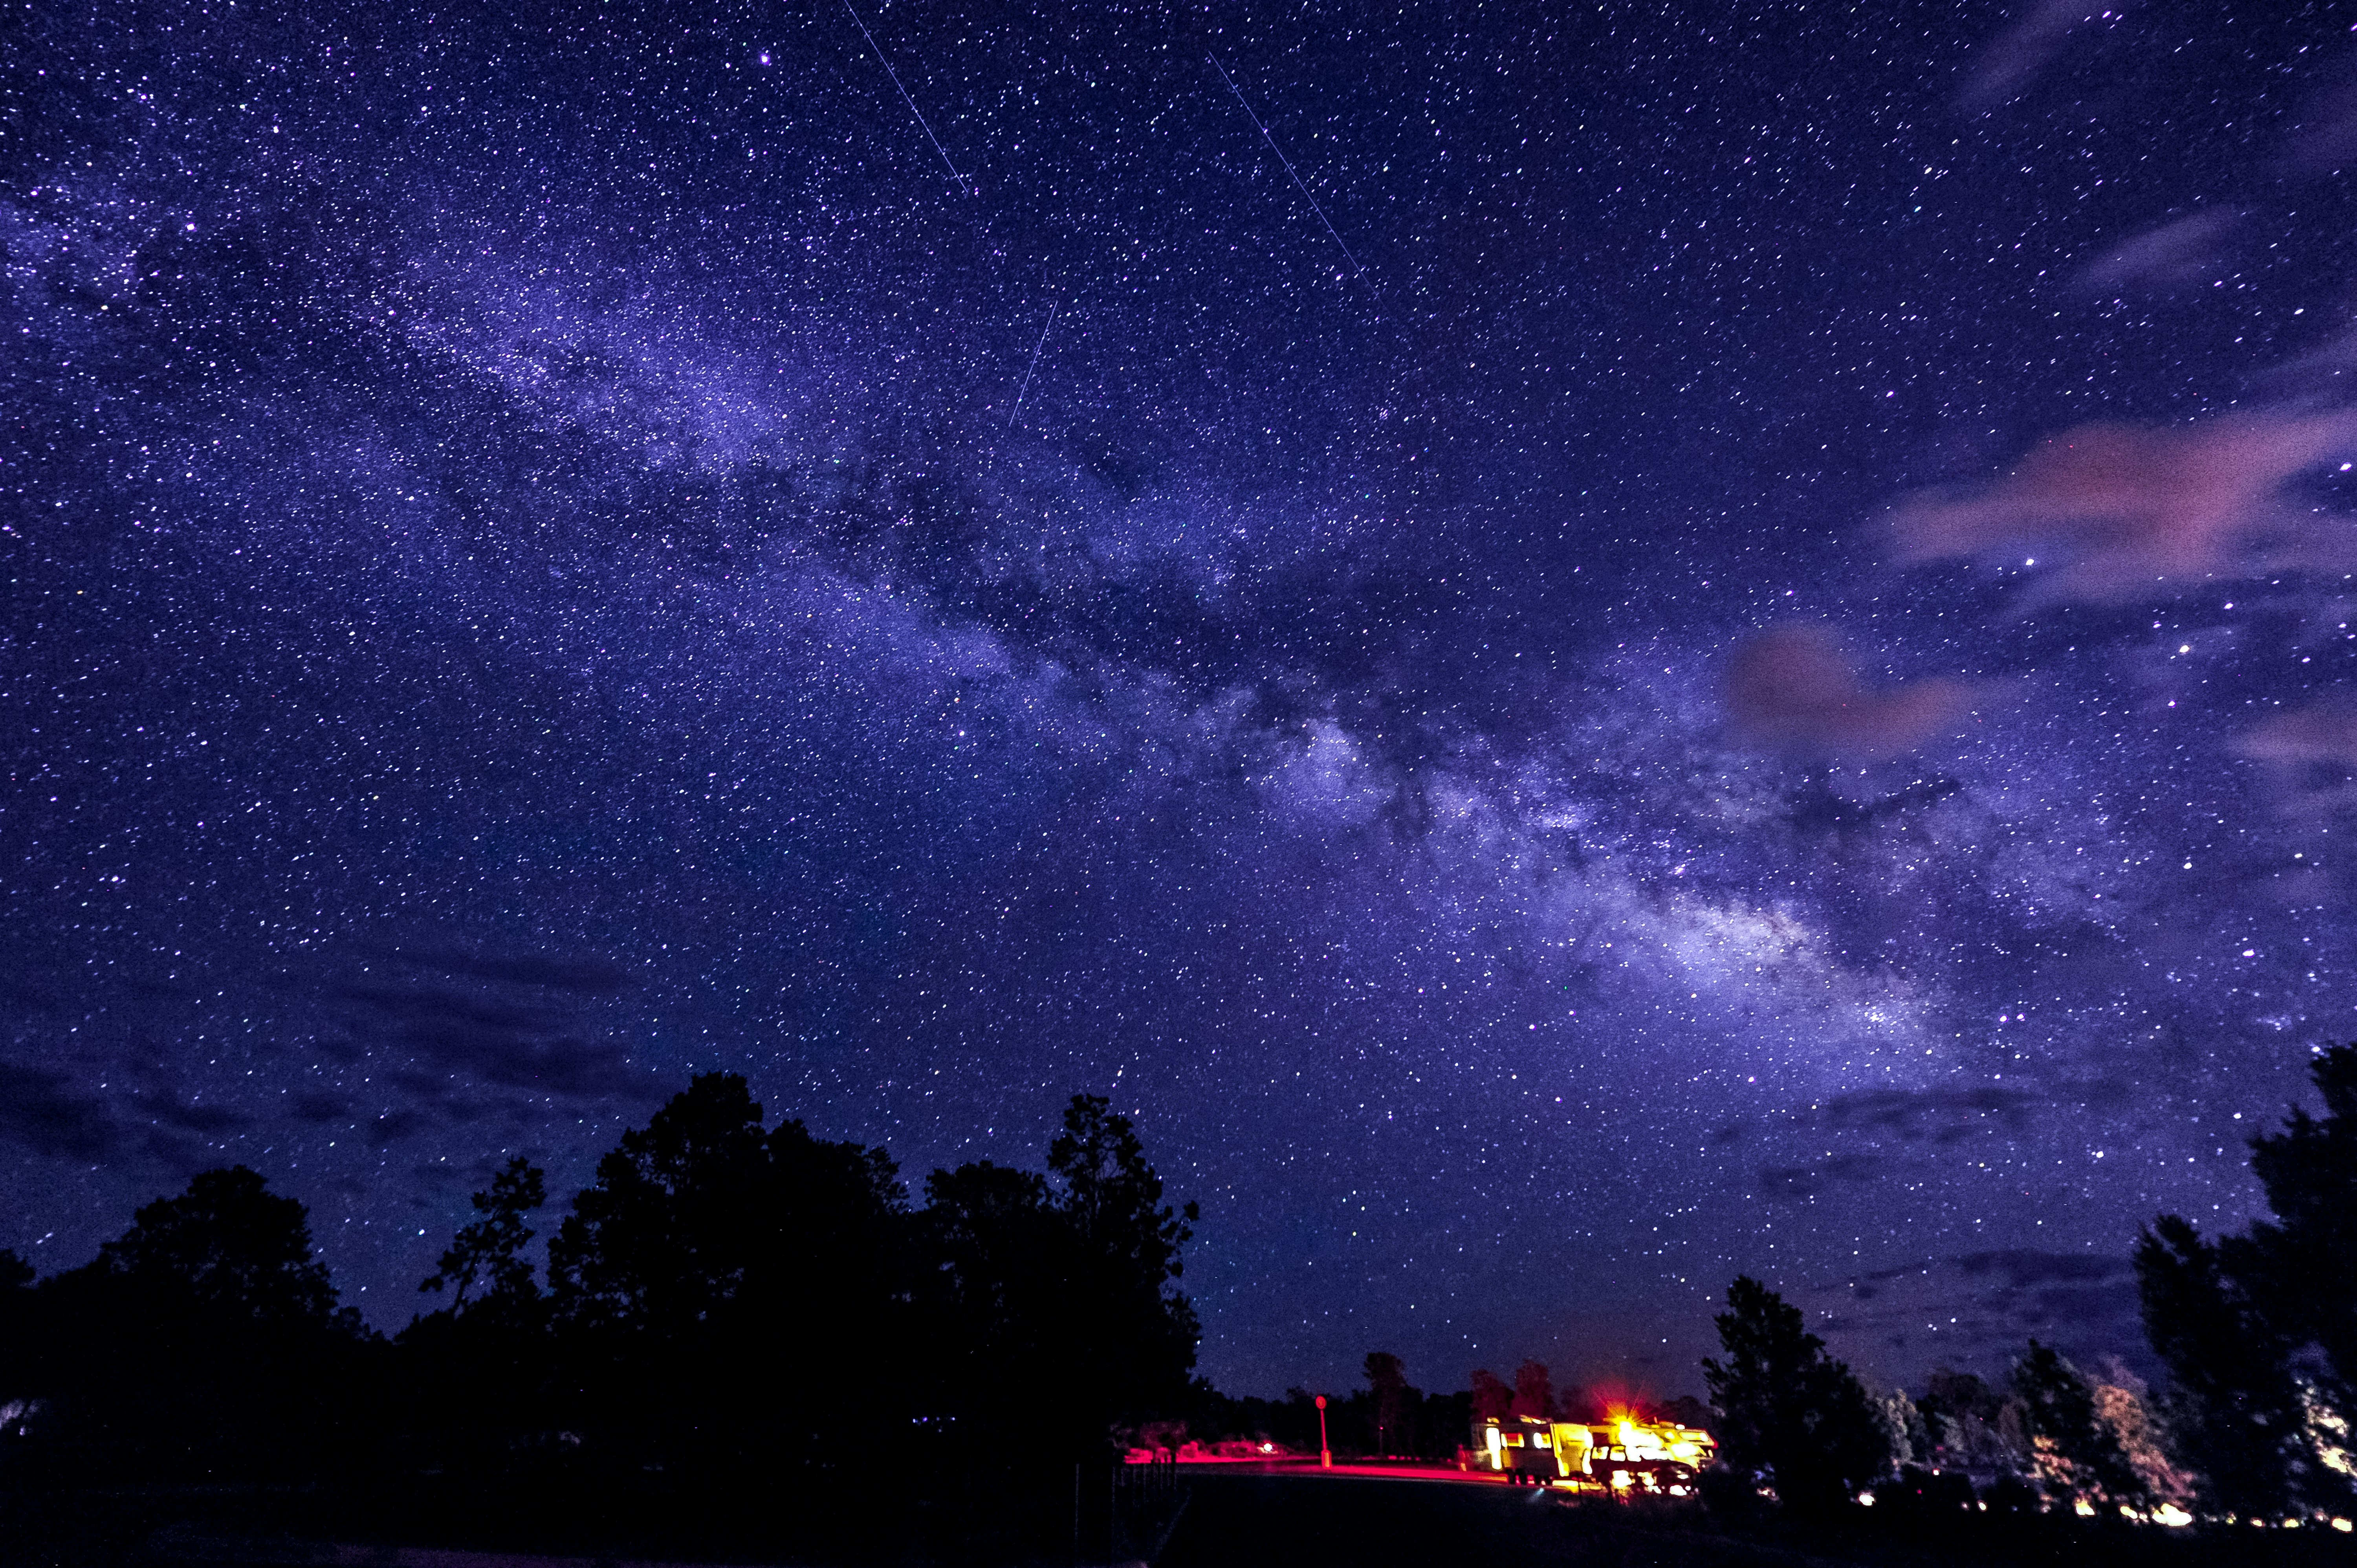 trees and lighted building under milky way